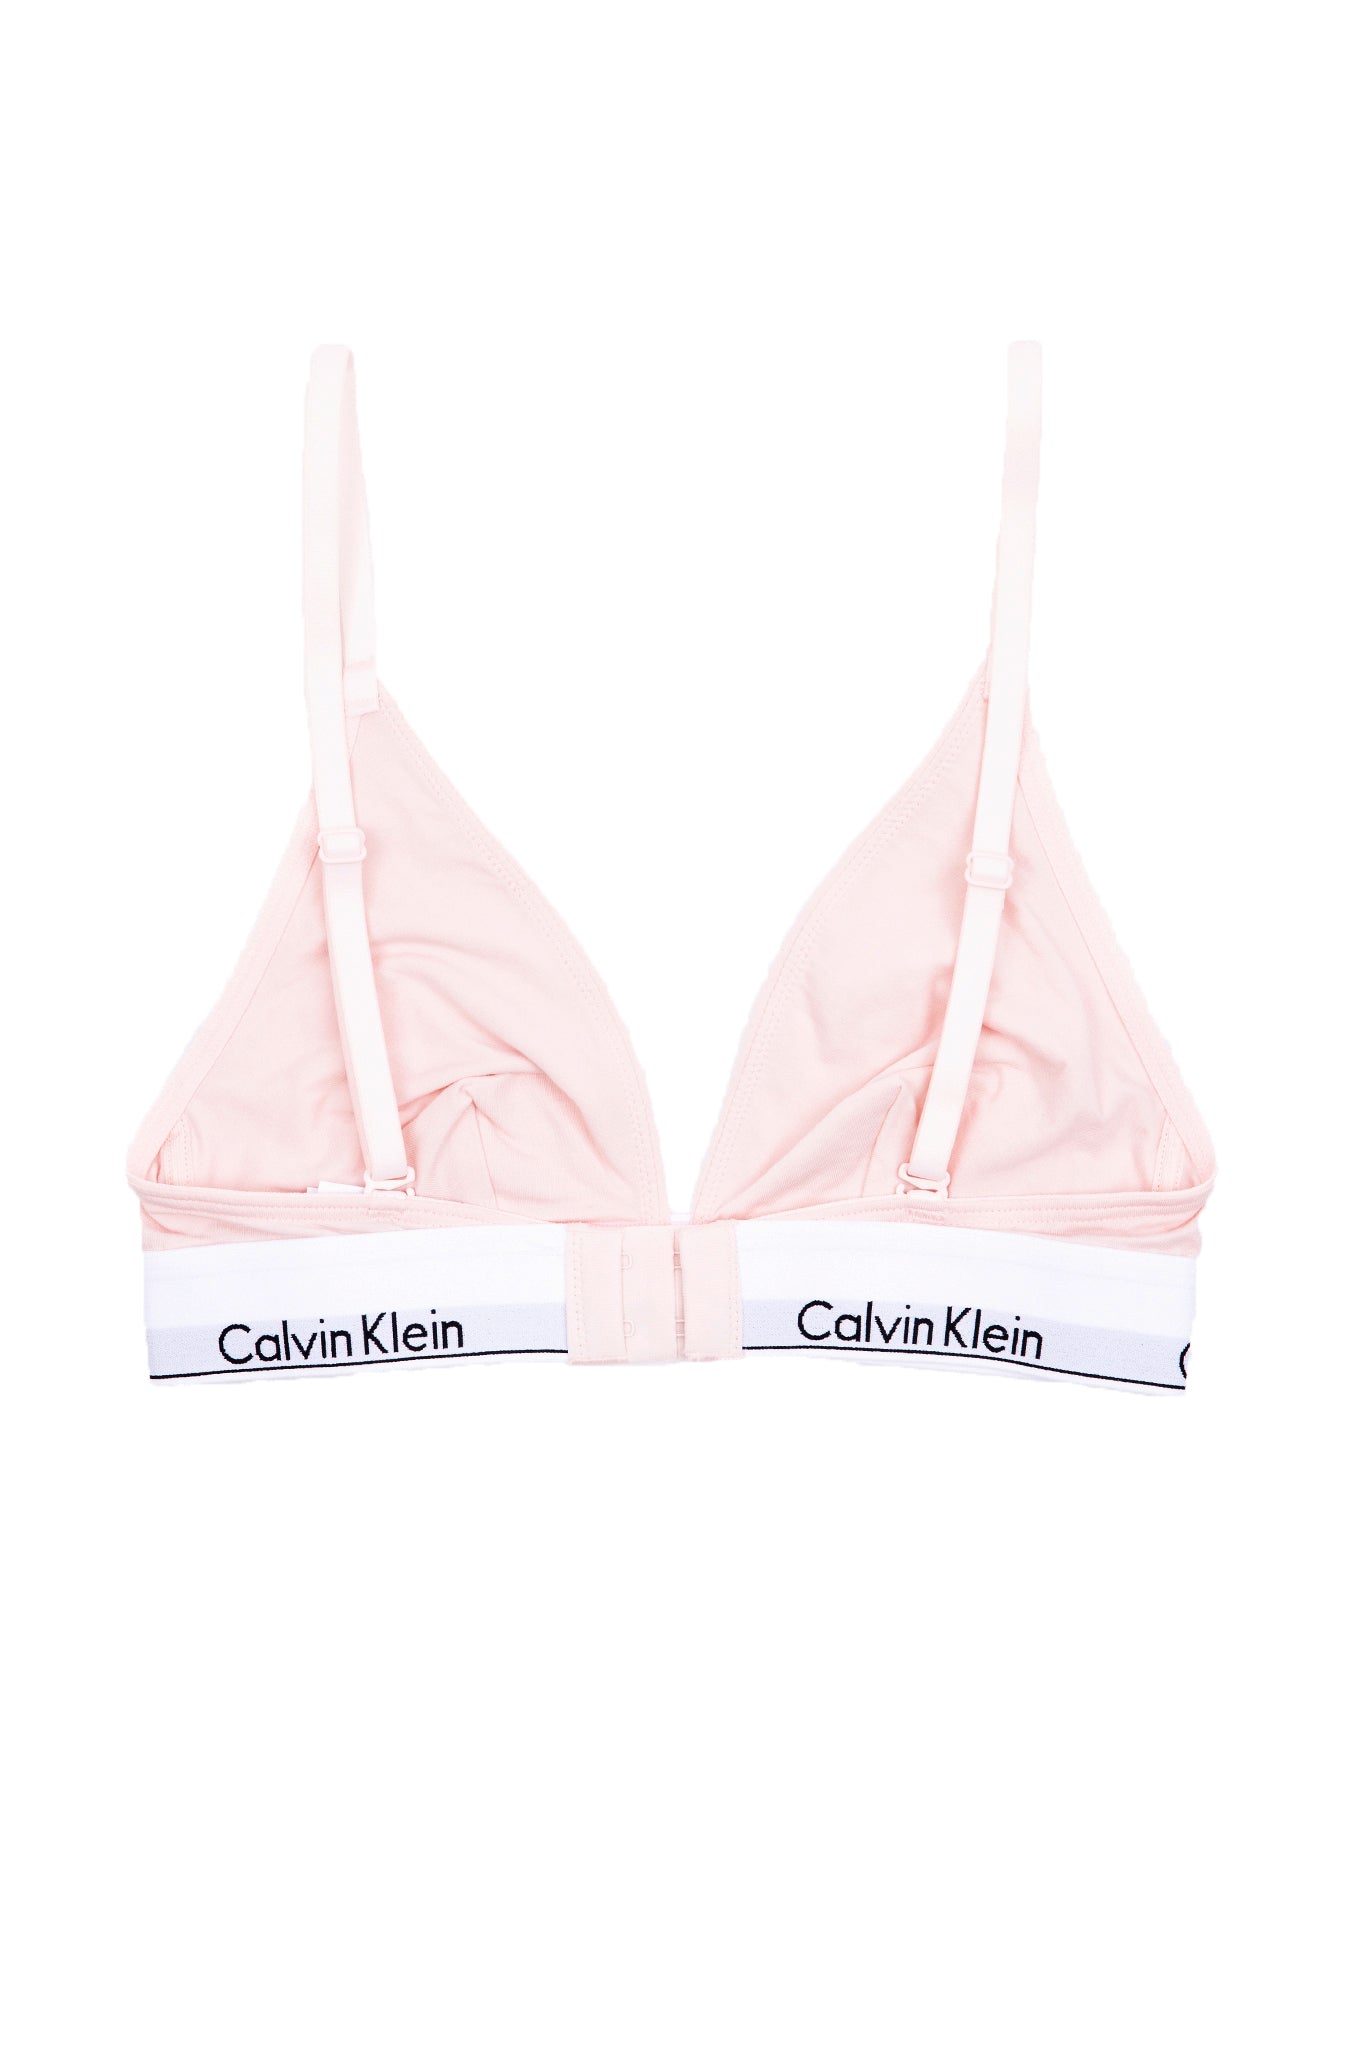 Calvin Klein NYMPH'S THIGH Modern Cotton Lightly Lined Bralette, US Large